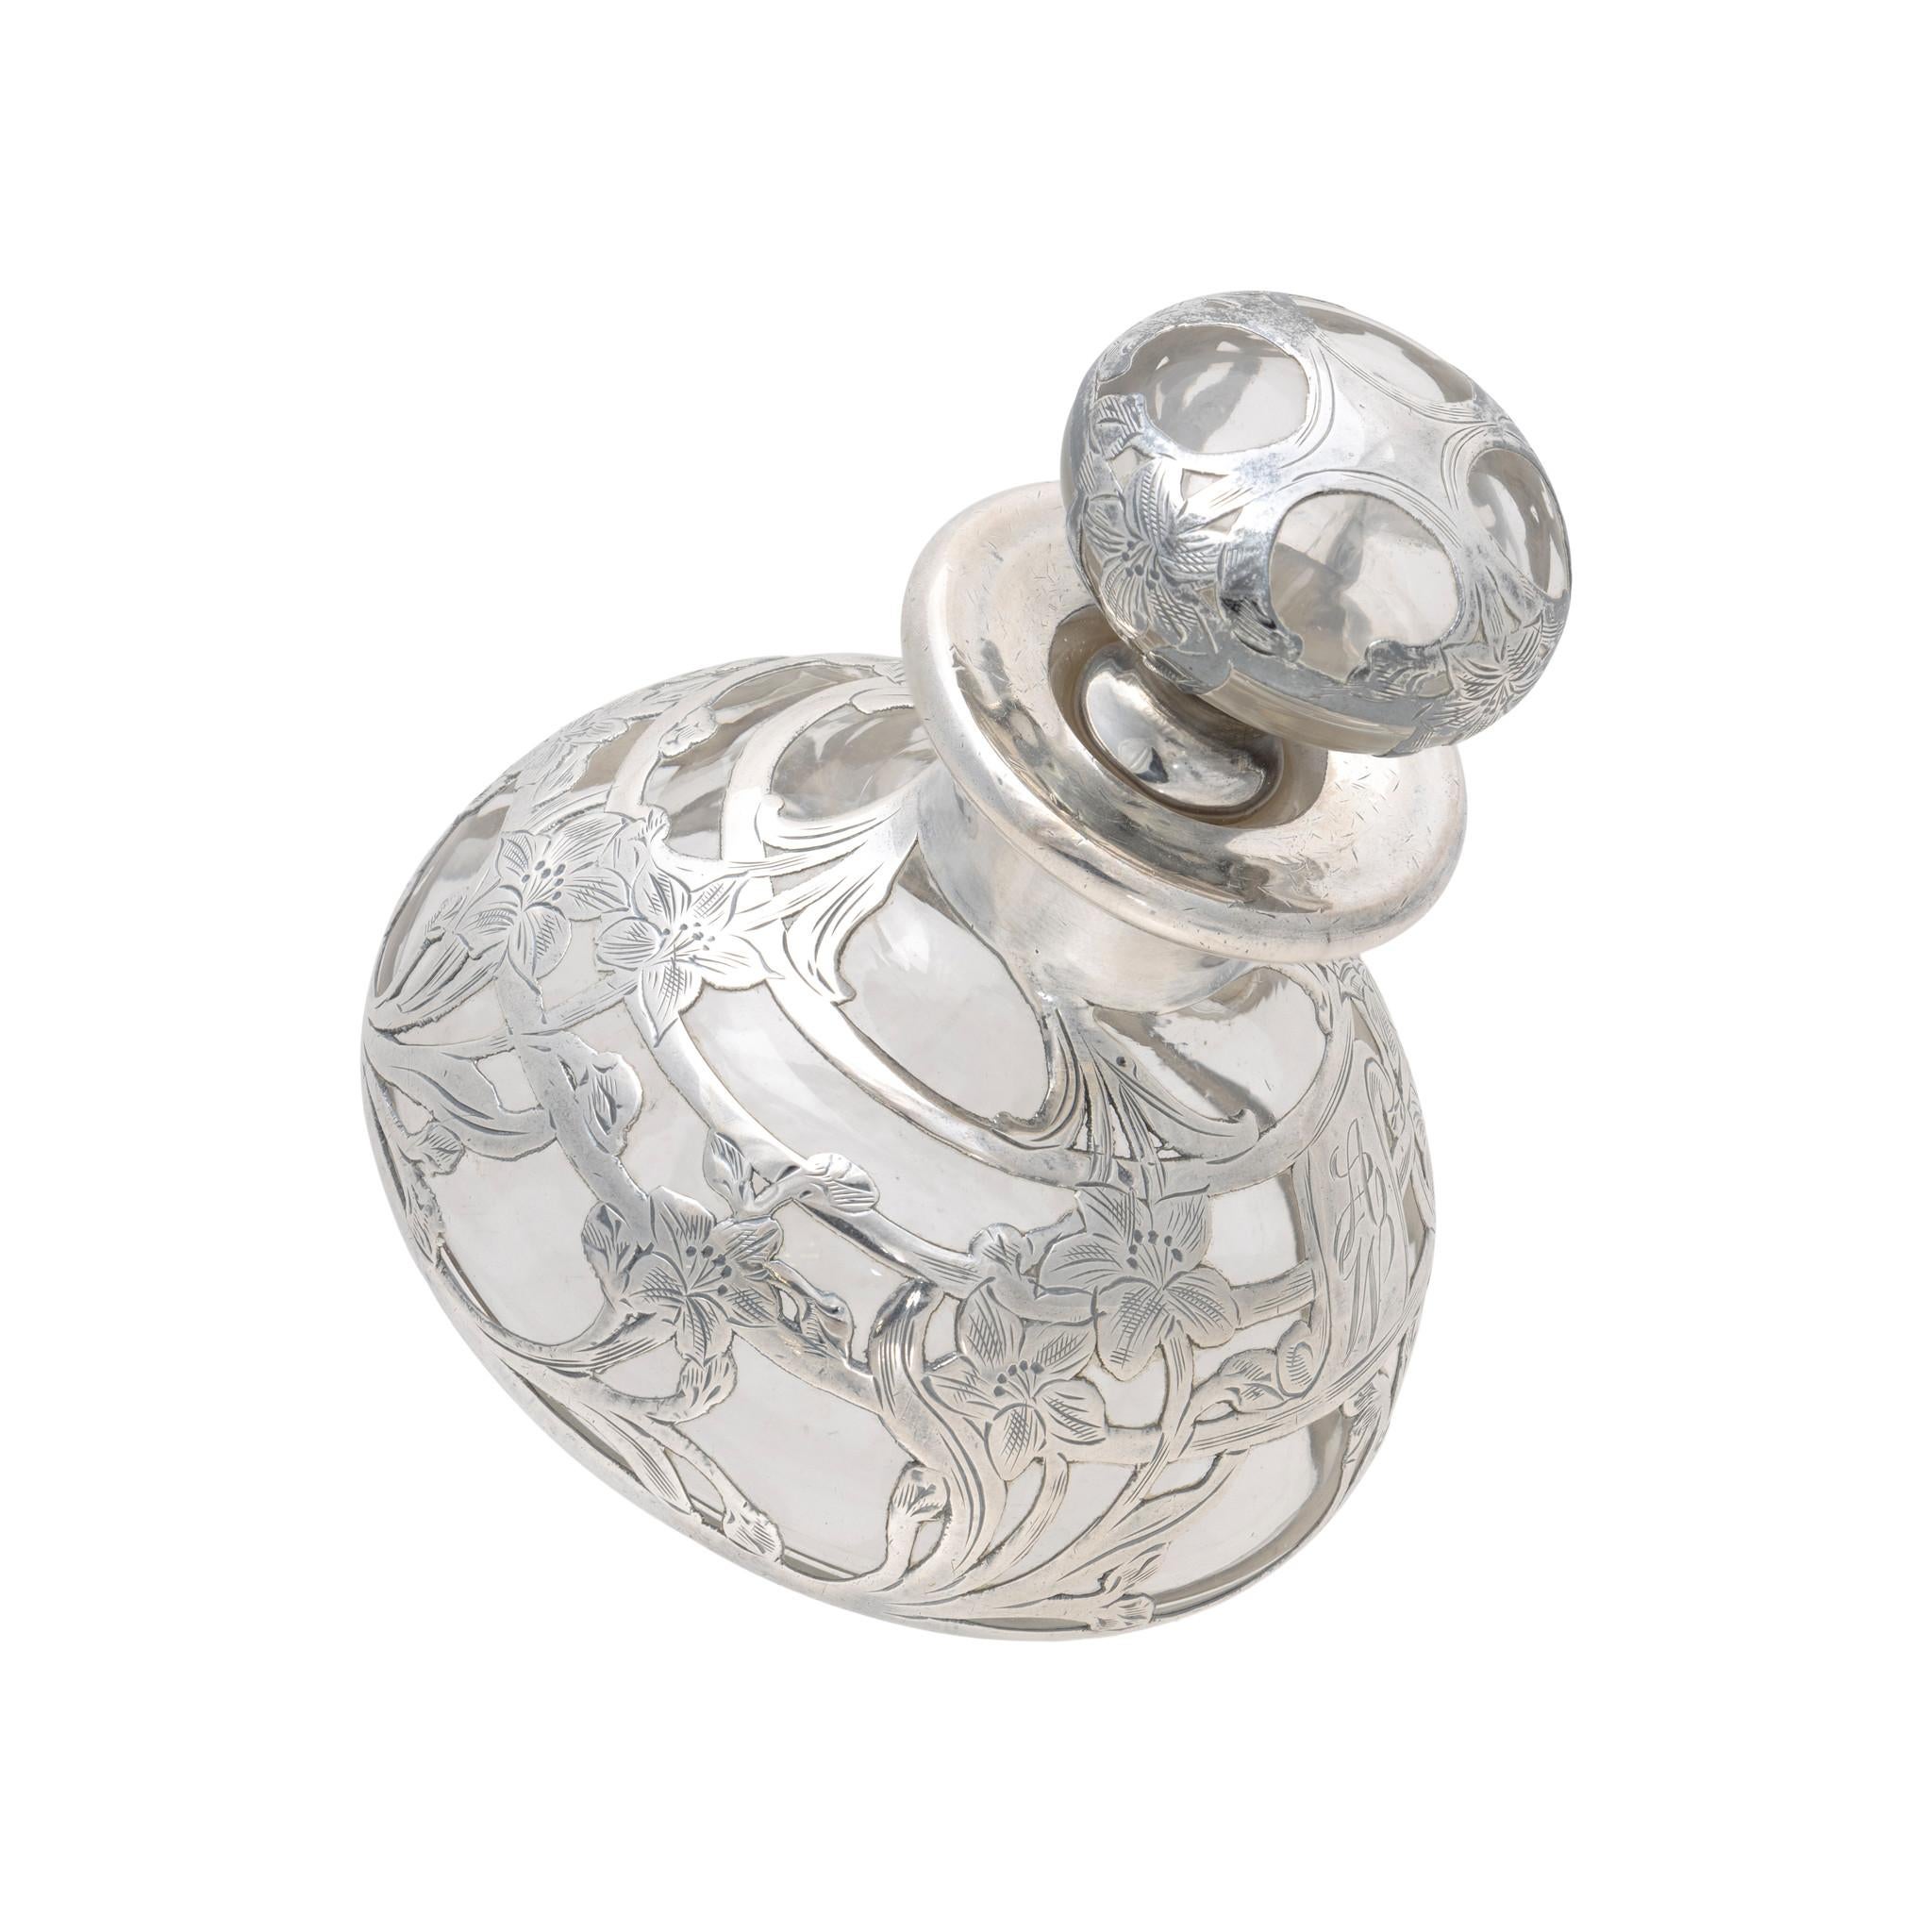 Alvin silver overlay glass perfume bottle. With clear glass and art nouveau style silverwork, featuring 8 bouquets of daffodil or narcissus flowers with complementary design on stopper. Center has monogrammed letters 